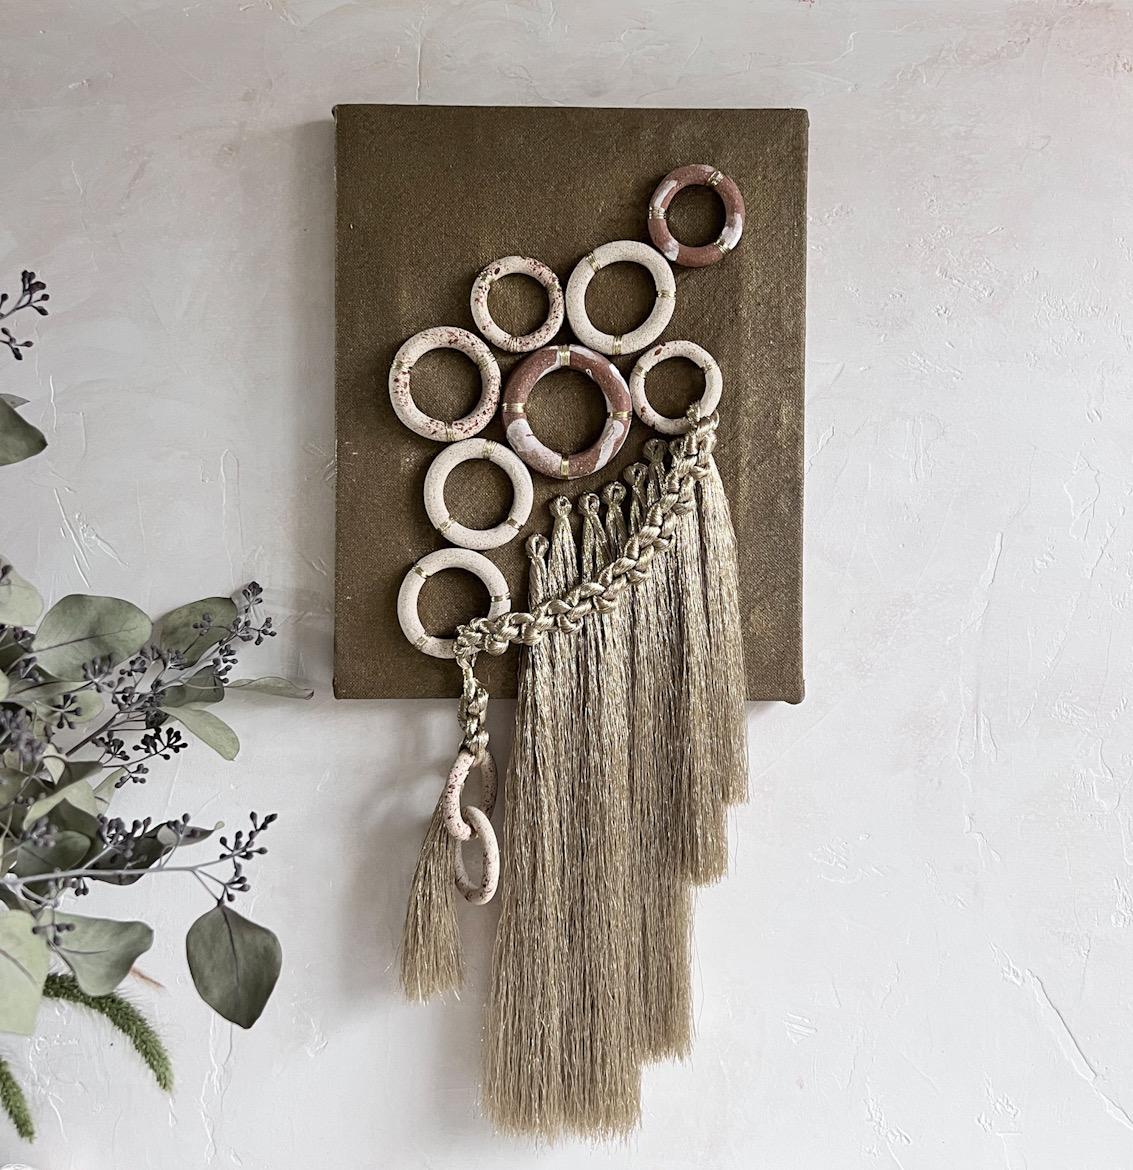 A unique combination of materials adorning a hand painted linen canvas would make a great addition to a wall gallery or hung by itself in small wall space. 

The hand built stoneware rings are embroidered to the surface, with added details of